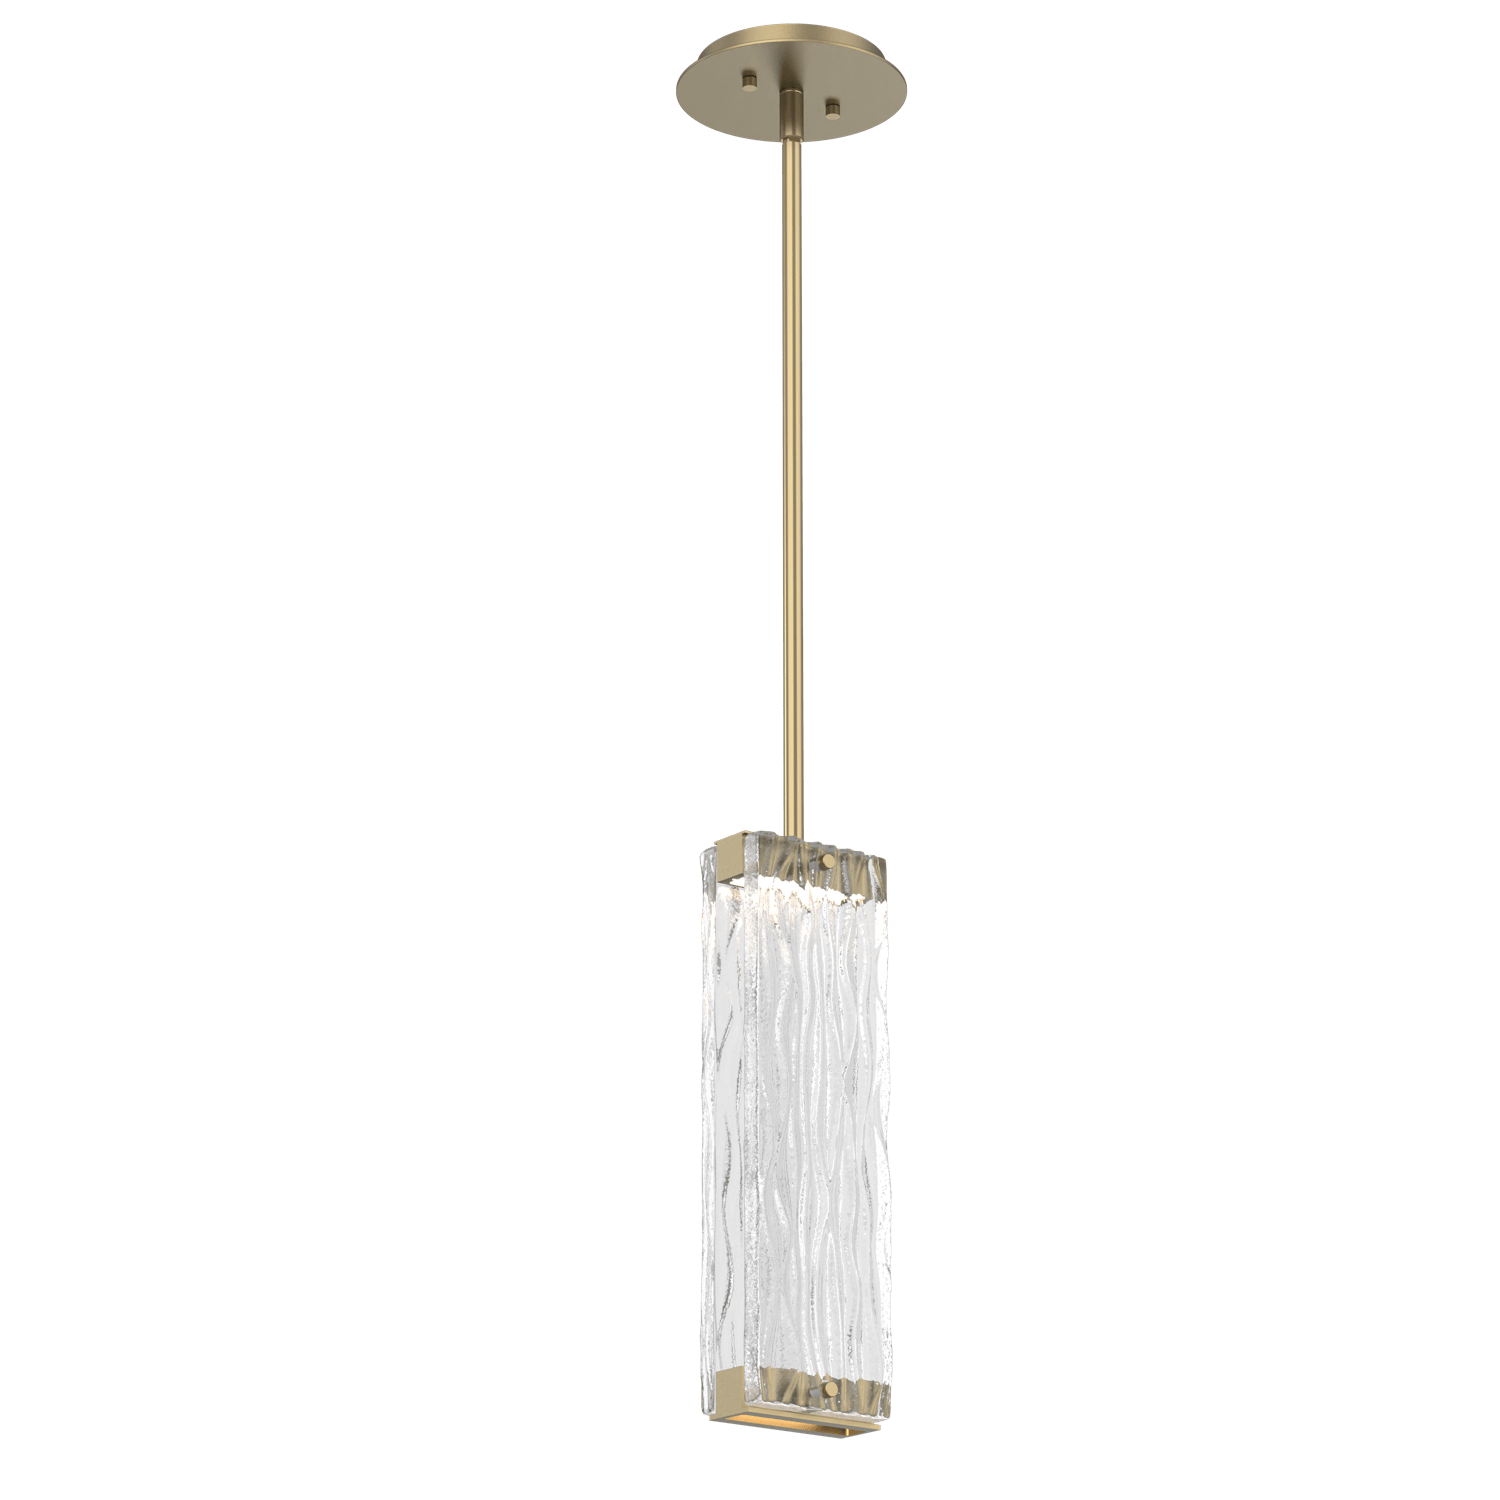 LAB0090-01-GB-TT-Hammerton-Studio-Tabulo-pendant-light-with-gilded-brass-finish-and-clear-tidal-cast-glass-shade-and-LED-lamping